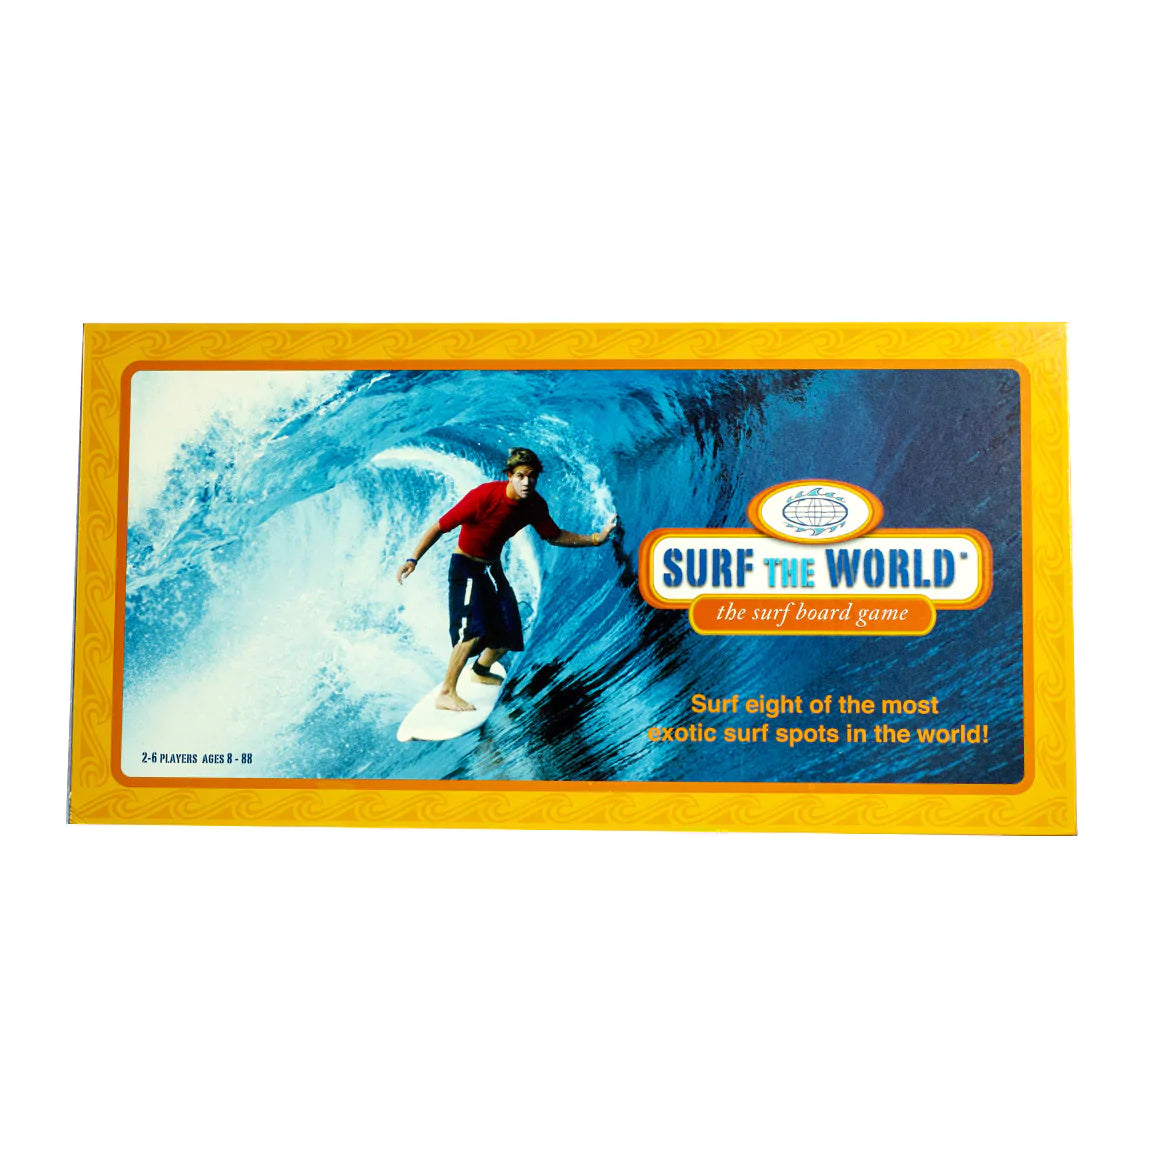 Surfers games - more than 40 games